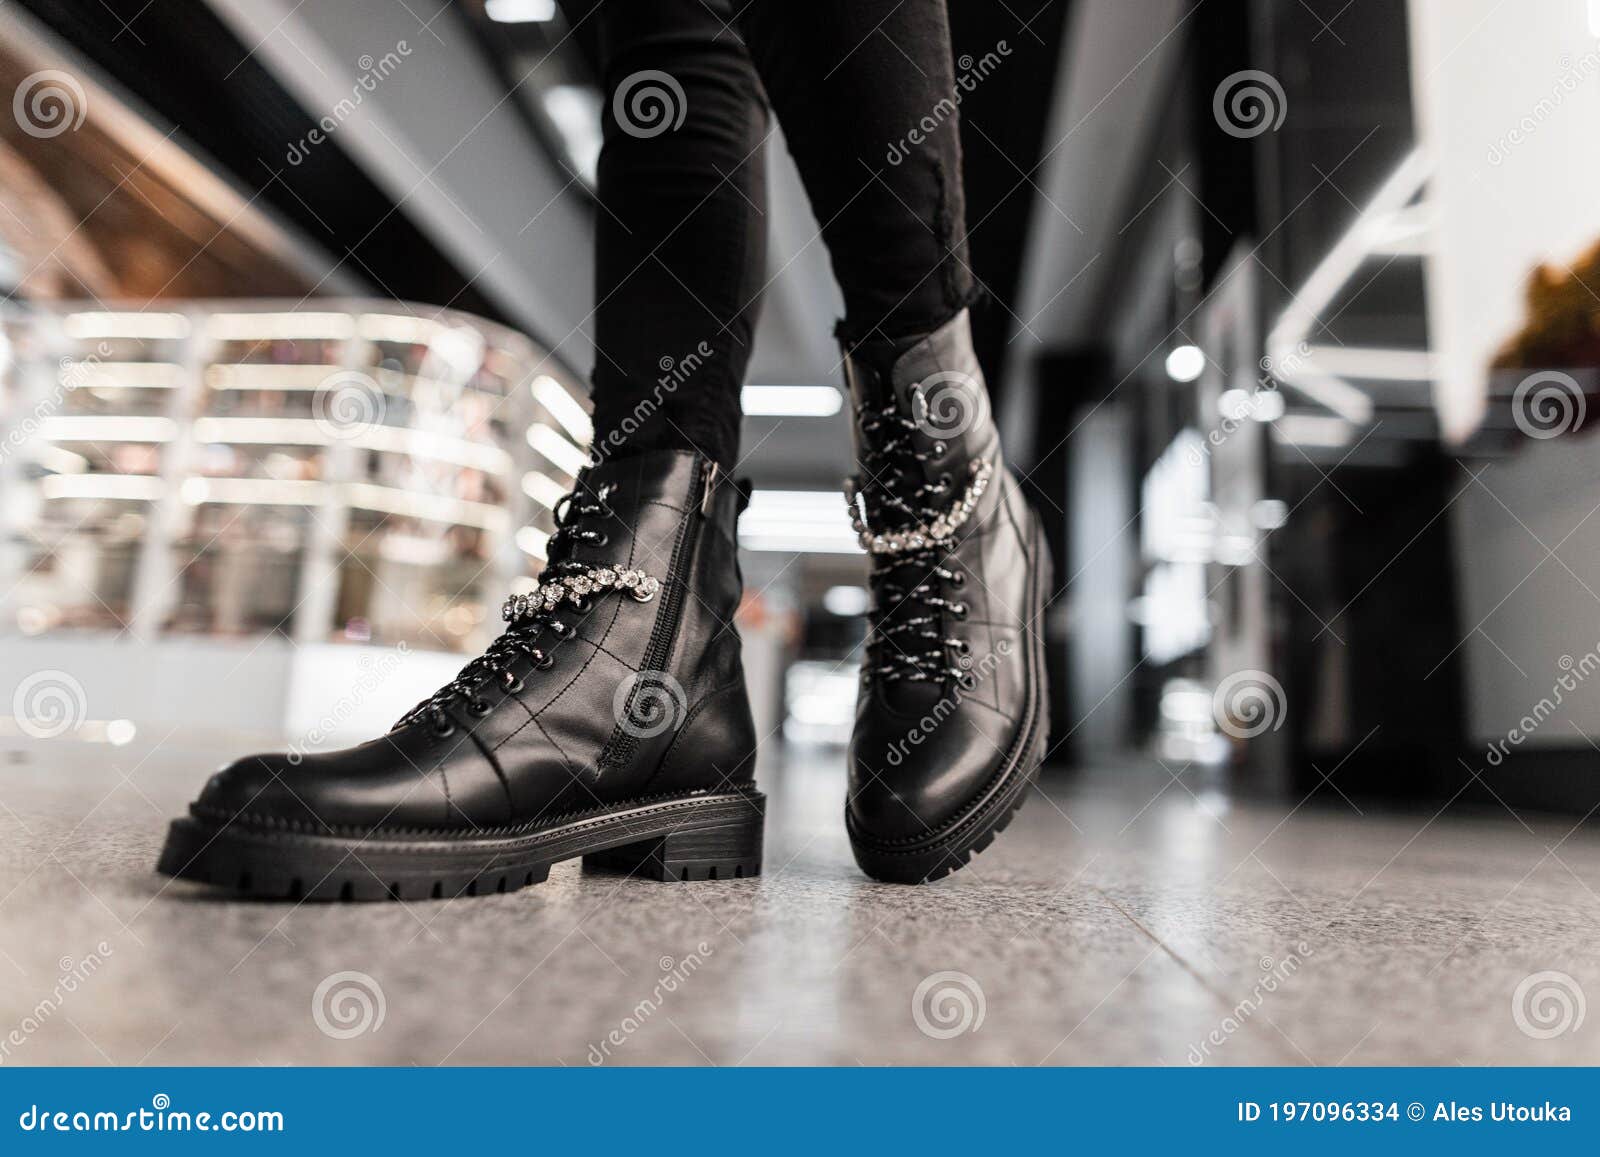 boots at the mall